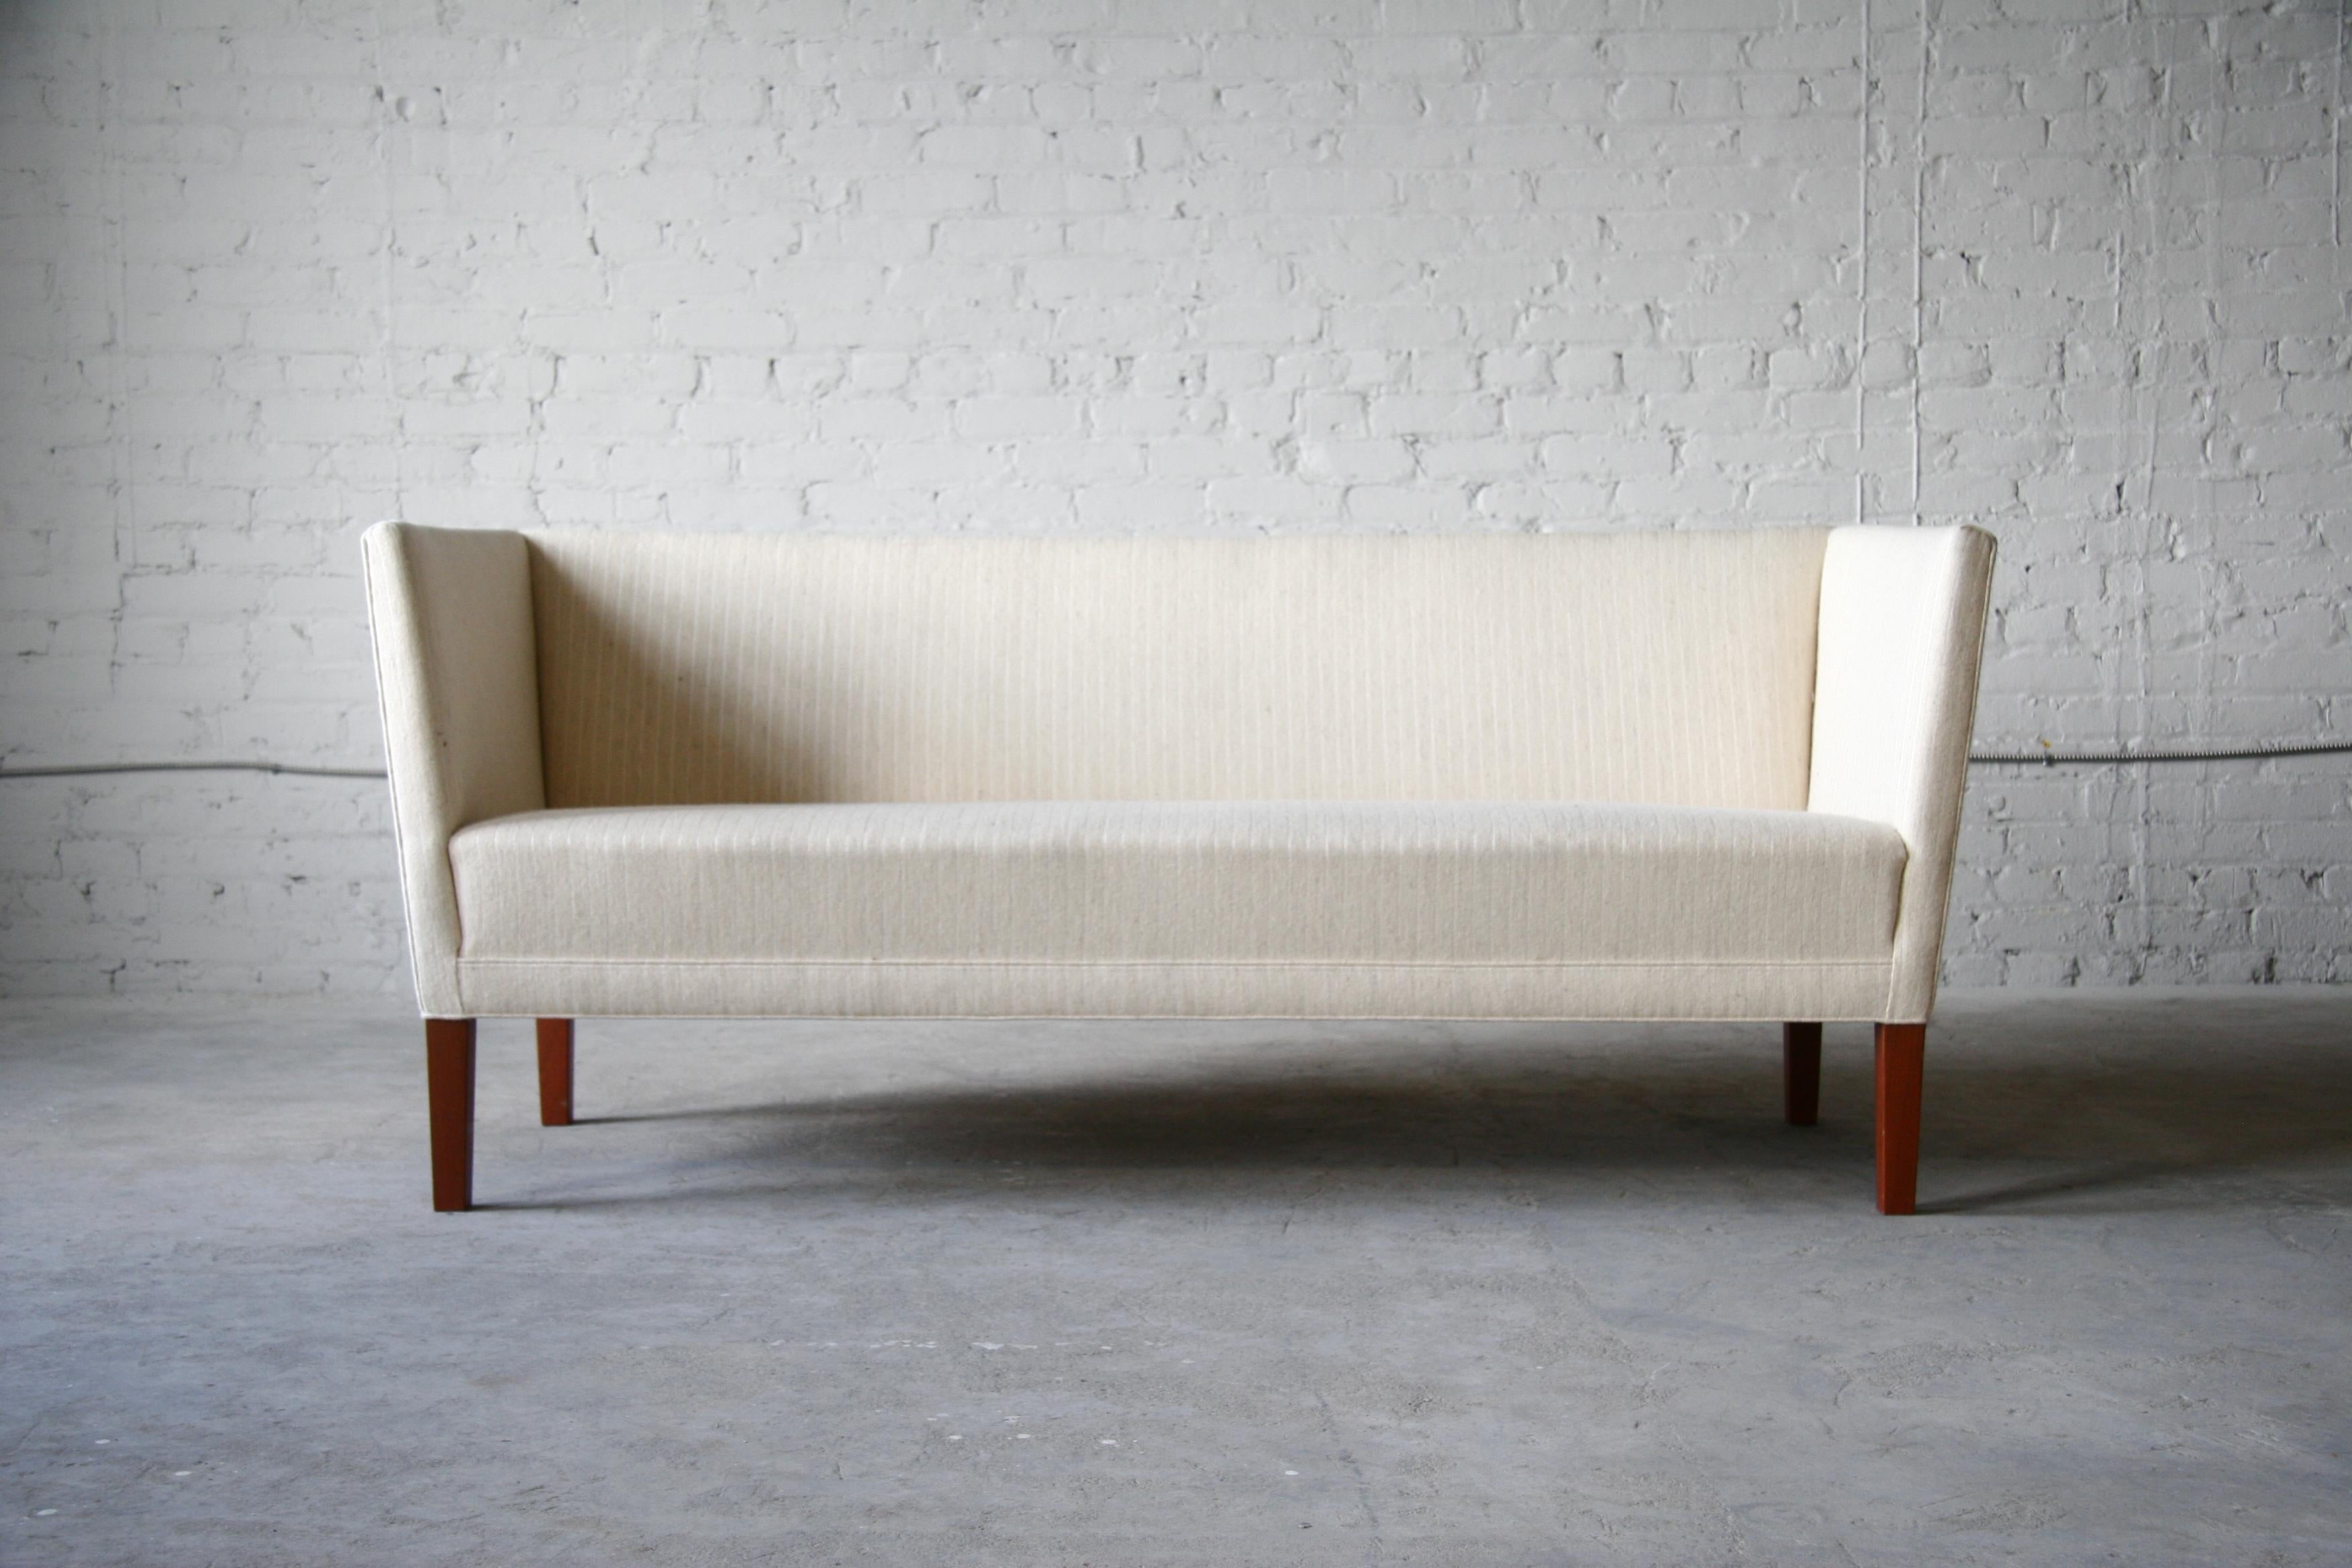 A mahogany sofa by Grete Jalk for Johannes Hansen. As far as we know, this is the only design Jalk created for Johannes Hansen. It is a linear and minimalist box style sofa that envelopes one who sits in it. 

The sofa sits atop solid mahogany